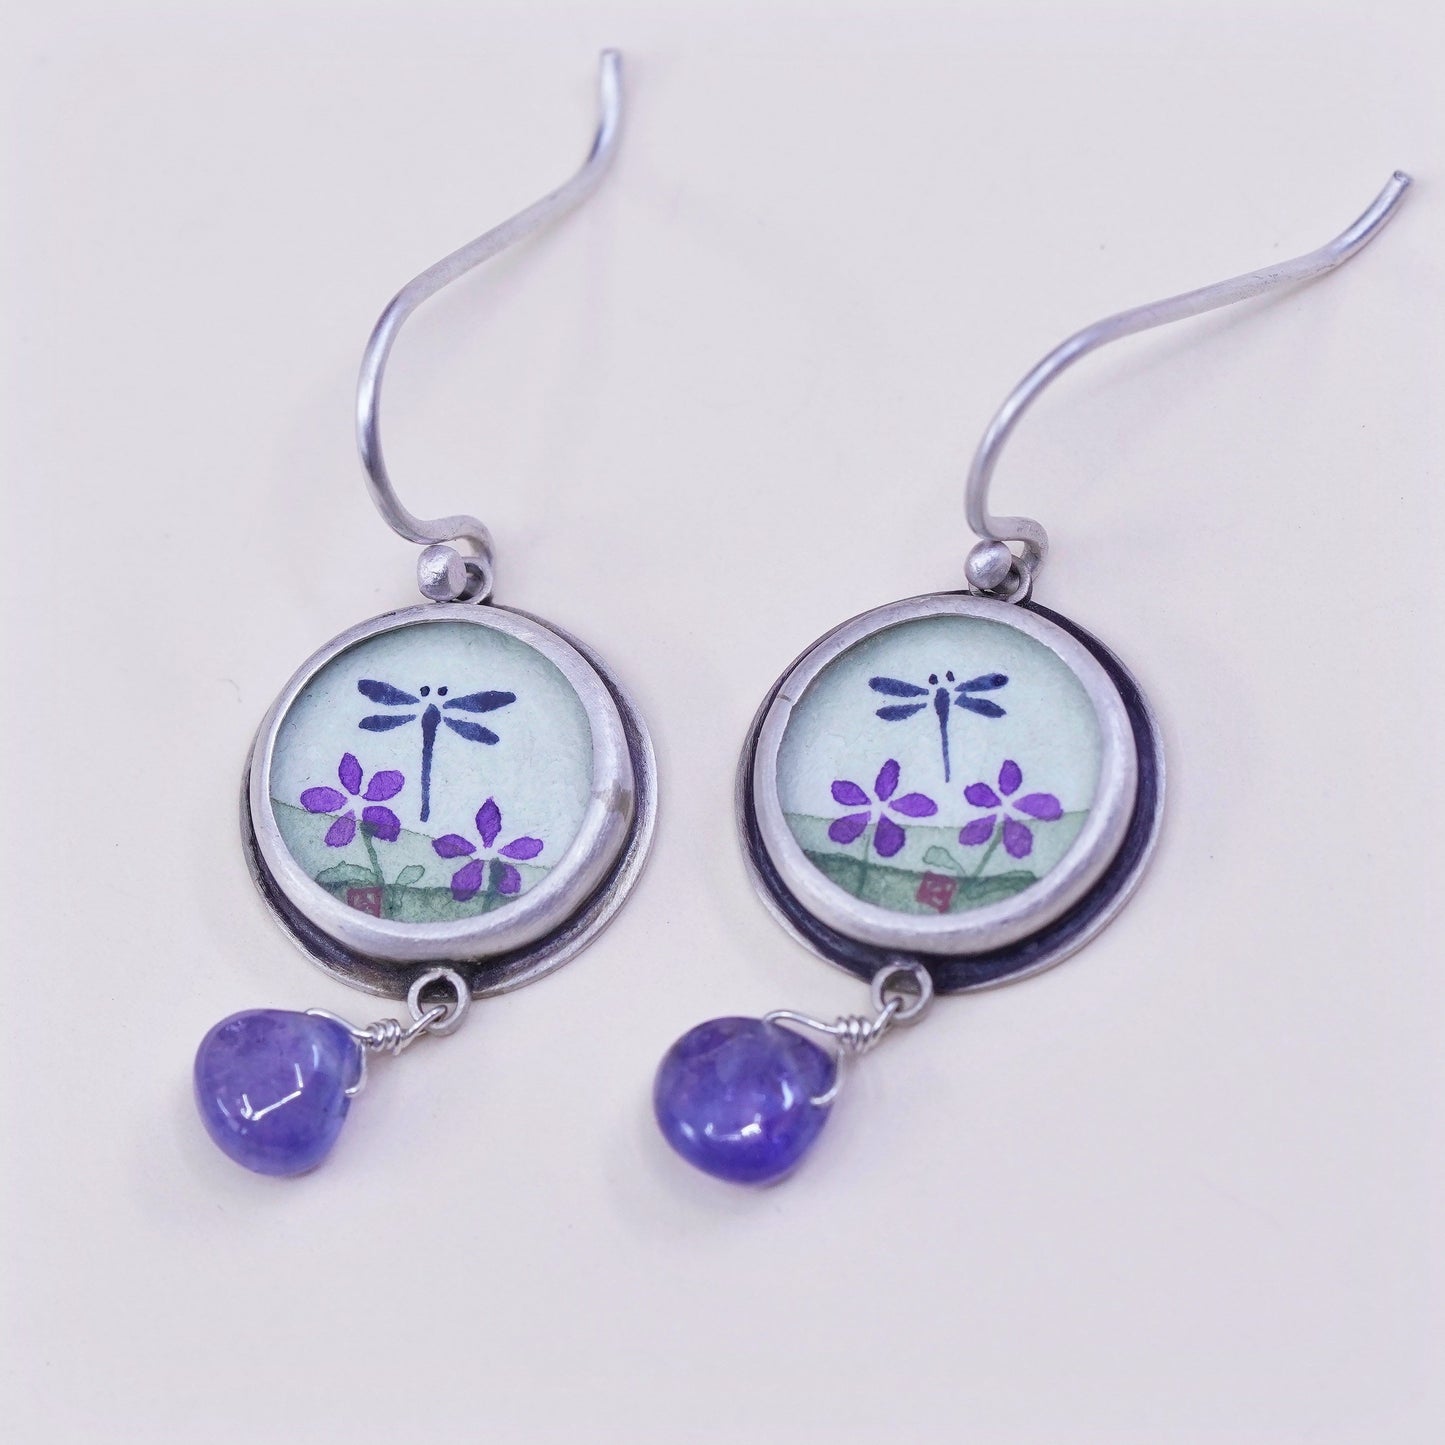 Designer Ananda KHALSA Sterling 925 silver handmade earrings, watercolor dragonfly with teardrop Iolite, stamped 925 A